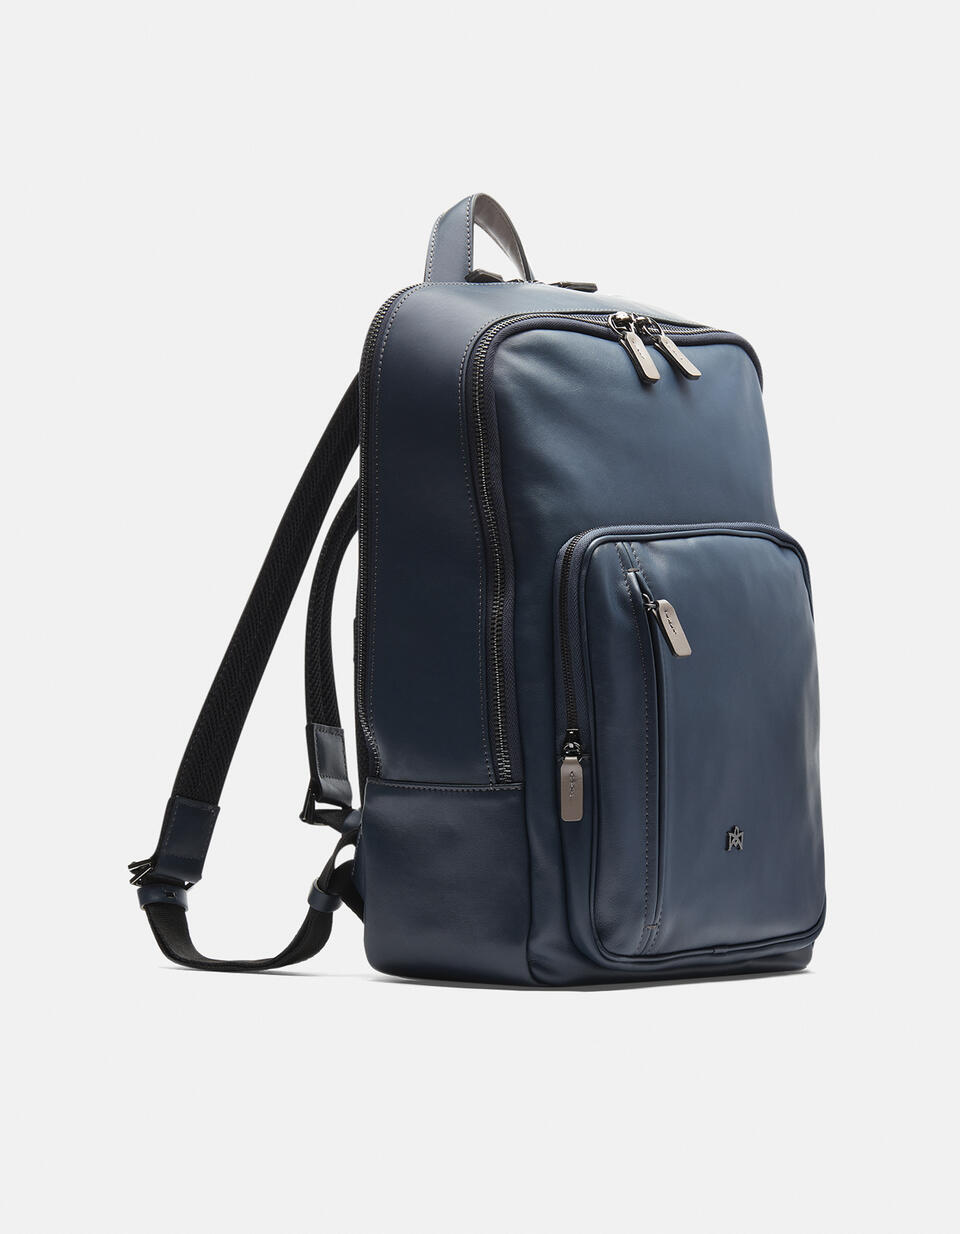 Business backpack  - Backpacks - Men's Bags - Bags - Cuoieria Fiorentina